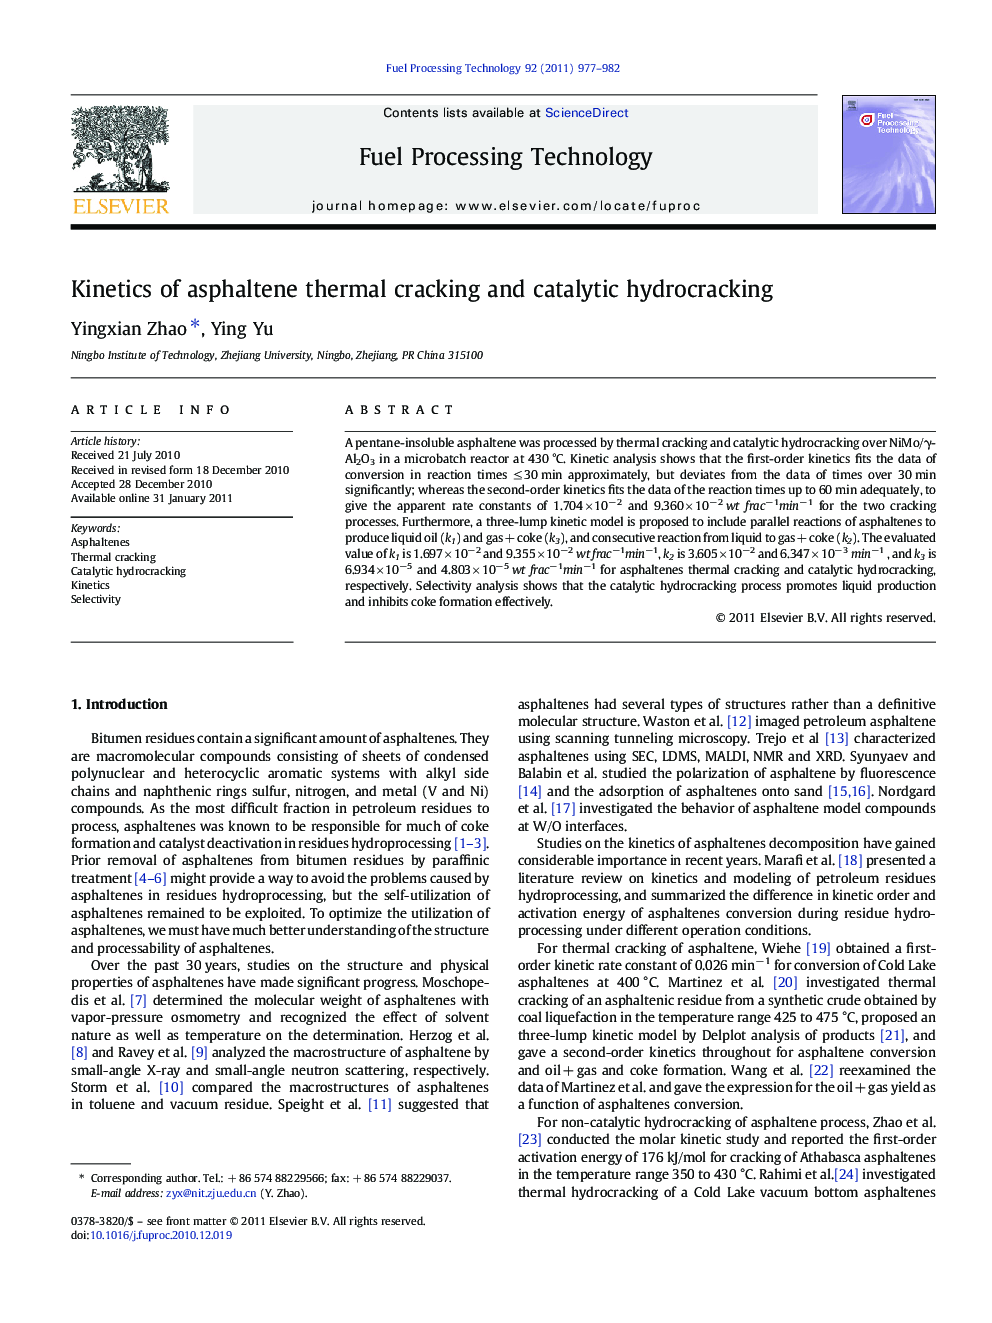 Kinetics of asphaltene thermal cracking and catalytic hydrocracking